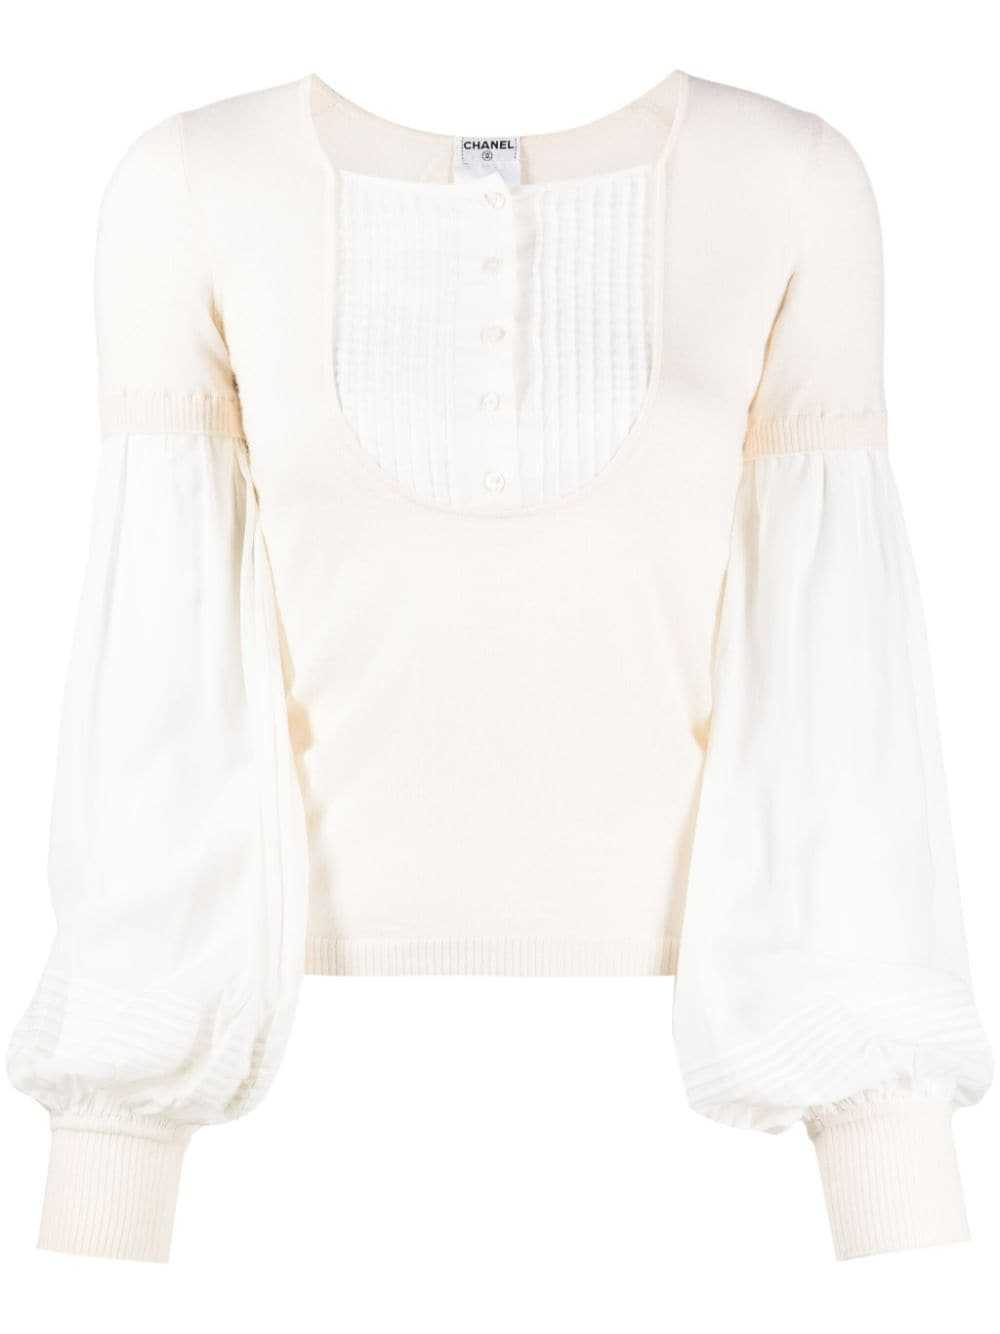 CHANEL Pre-Owned 2003 layered knit top - Neutrals - image 1